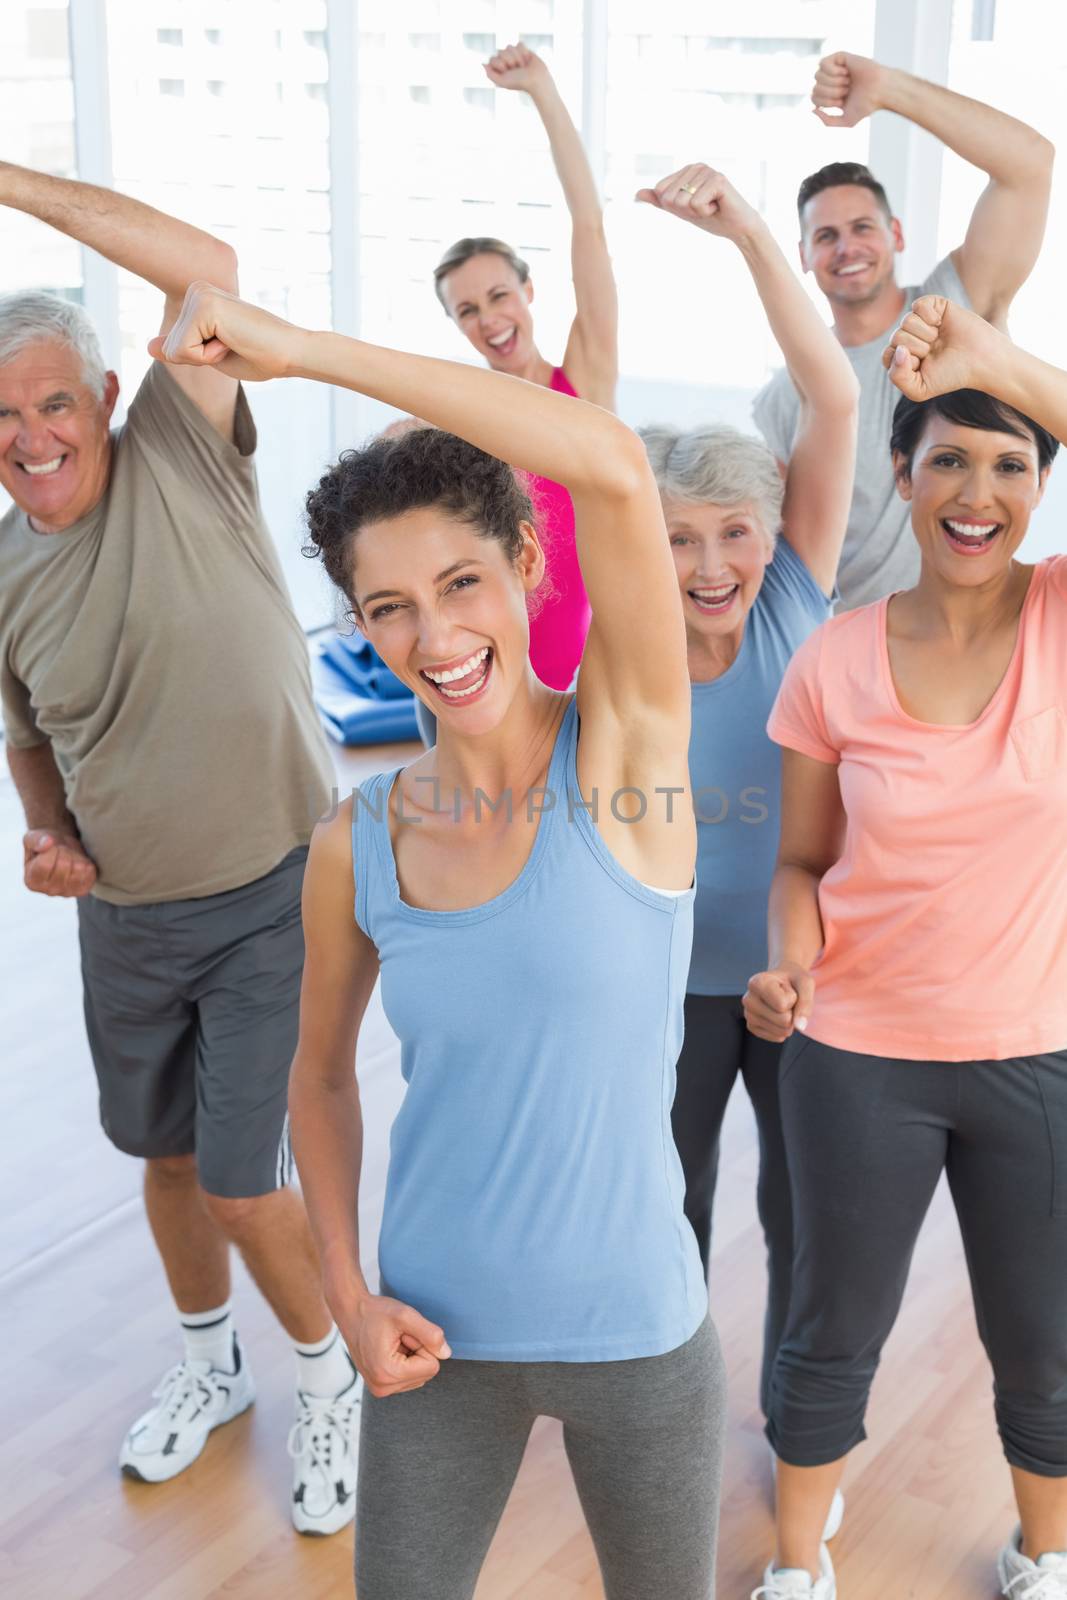 Portrait of smiling people doing power fitness exercise at yoga class in fitness studio